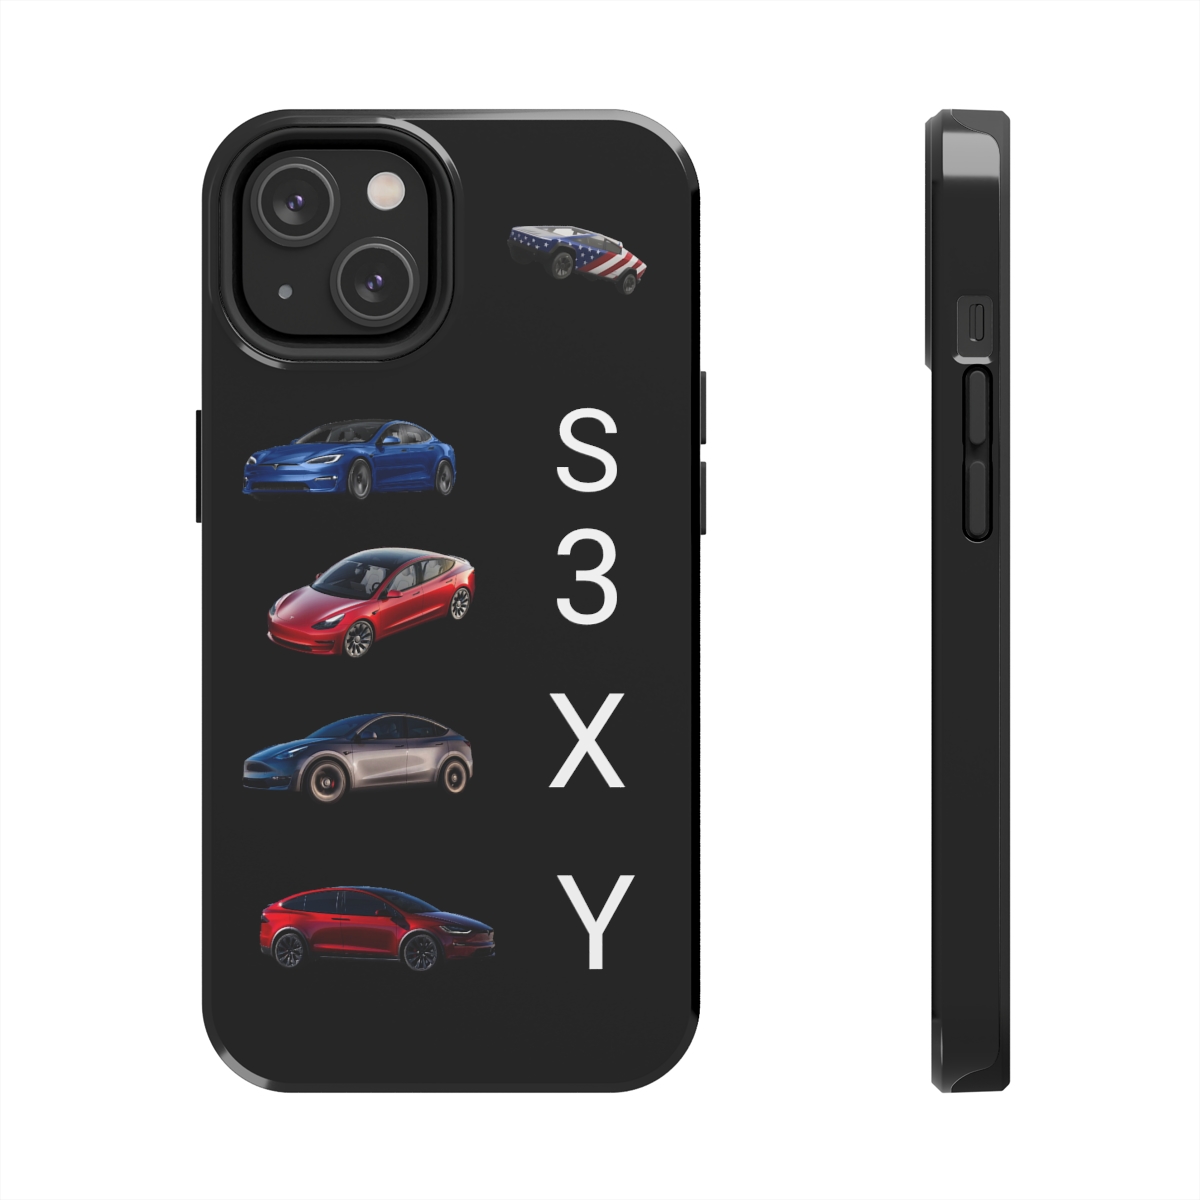 The S.3.X.Y Tough Phone Cases, Case-Mate product main image